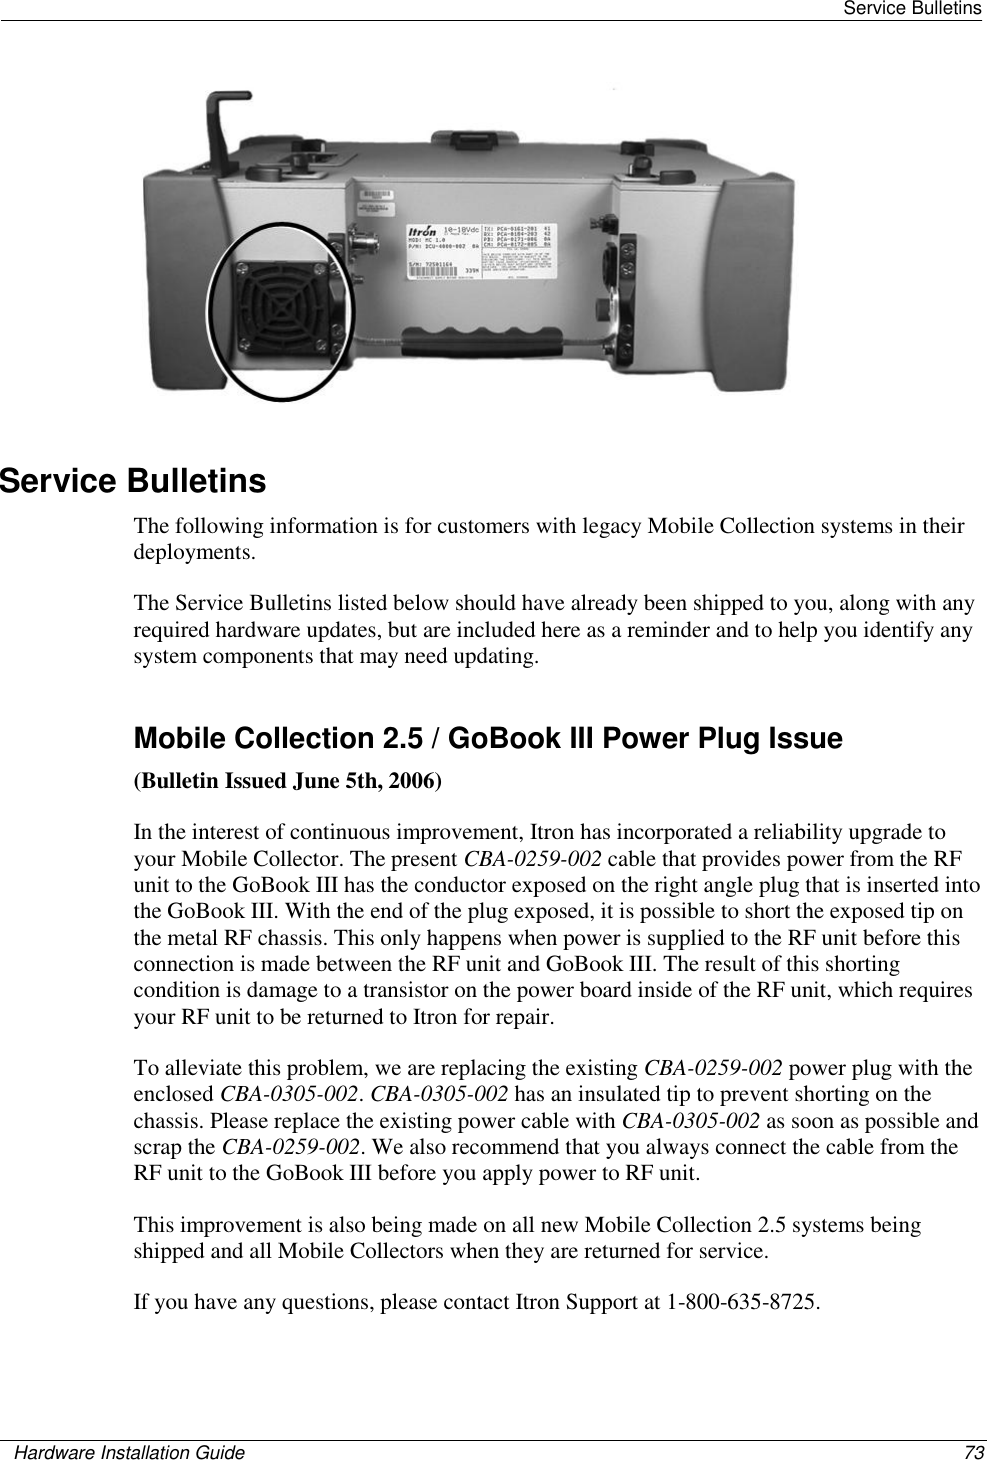   Service Bulletins    Hardware Installation Guide  73    Service Bulletins The following information is for customers with legacy Mobile Collection systems in their deployments.  The Service Bulletins listed below should have already been shipped to you, along with any required hardware updates, but are included here as a reminder and to help you identify any system components that may need updating.   Mobile Collection 2.5 / GoBook III Power Plug Issue (Bulletin Issued June 5th, 2006) In the interest of continuous improvement, Itron has incorporated a reliability upgrade to your Mobile Collector. The present CBA-0259-002 cable that provides power from the RF unit to the GoBook III has the conductor exposed on the right angle plug that is inserted into the GoBook III. With the end of the plug exposed, it is possible to short the exposed tip on the metal RF chassis. This only happens when power is supplied to the RF unit before this connection is made between the RF unit and GoBook III. The result of this shorting condition is damage to a transistor on the power board inside of the RF unit, which requires your RF unit to be returned to Itron for repair.  To alleviate this problem, we are replacing the existing CBA-0259-002 power plug with the enclosed CBA-0305-002. CBA-0305-002 has an insulated tip to prevent shorting on the chassis. Please replace the existing power cable with CBA-0305-002 as soon as possible and scrap the CBA-0259-002. We also recommend that you always connect the cable from the RF unit to the GoBook III before you apply power to RF unit. This improvement is also being made on all new Mobile Collection 2.5 systems being shipped and all Mobile Collectors when they are returned for service. If you have any questions, please contact Itron Support at 1-800-635-8725.   